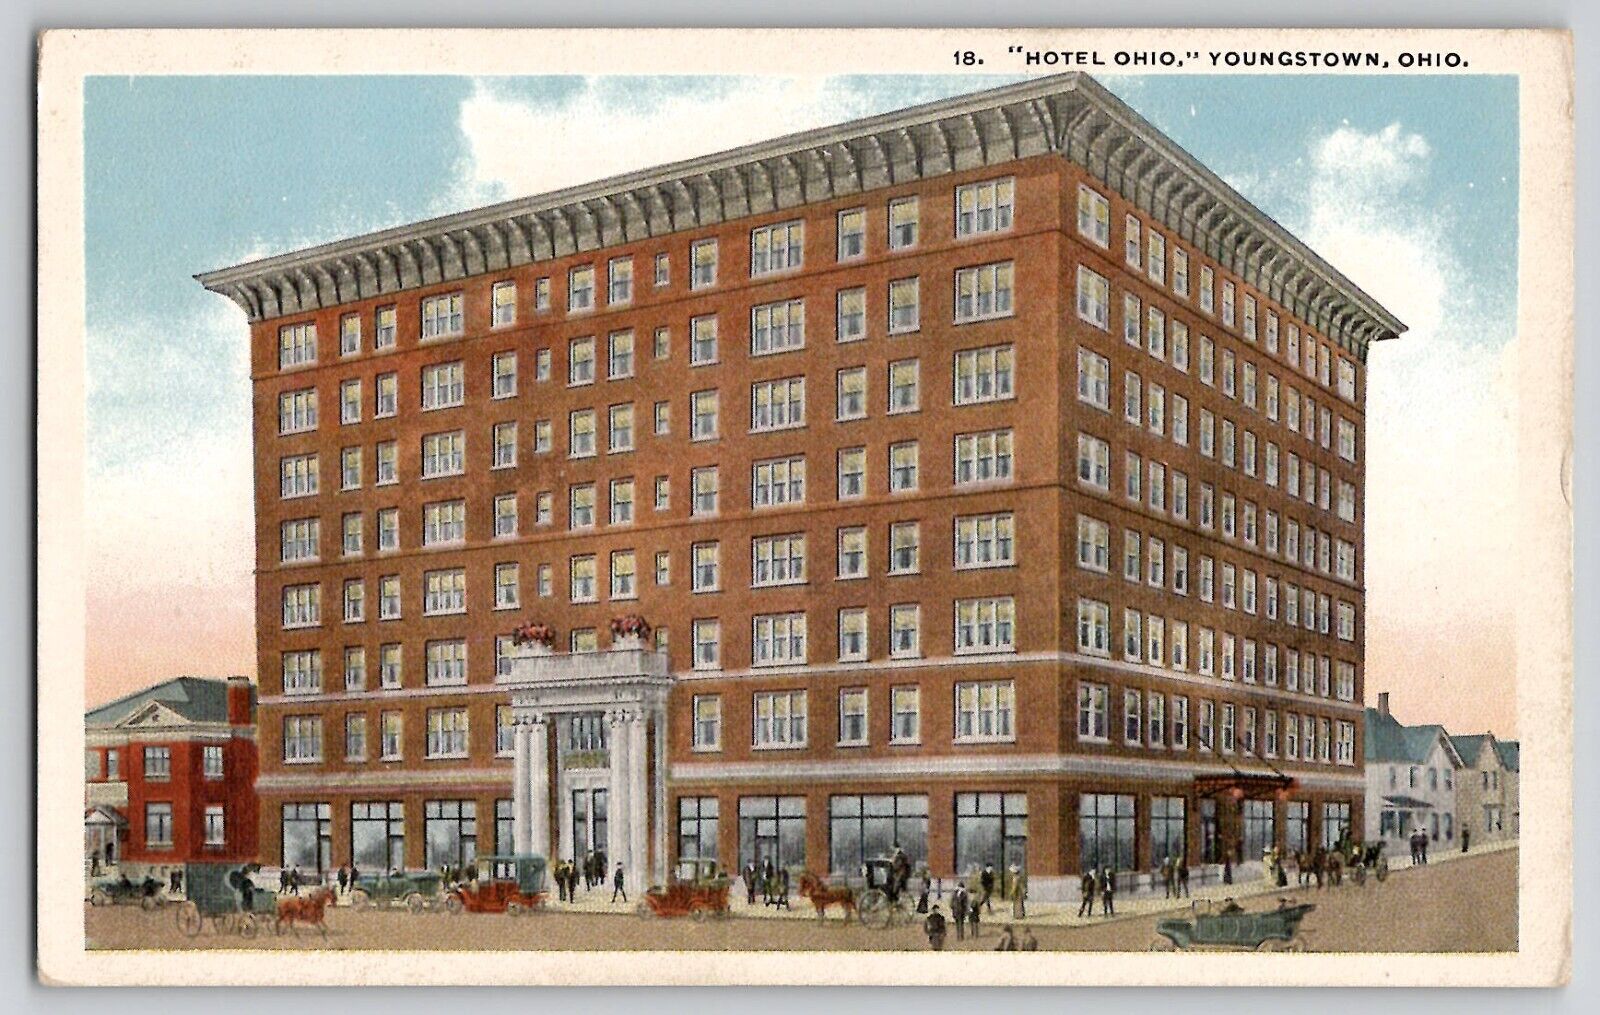 Hotel Ohio Youngstown OH Ohio Vtg Postcard Street View Horse Buggy Cars 1915-20s